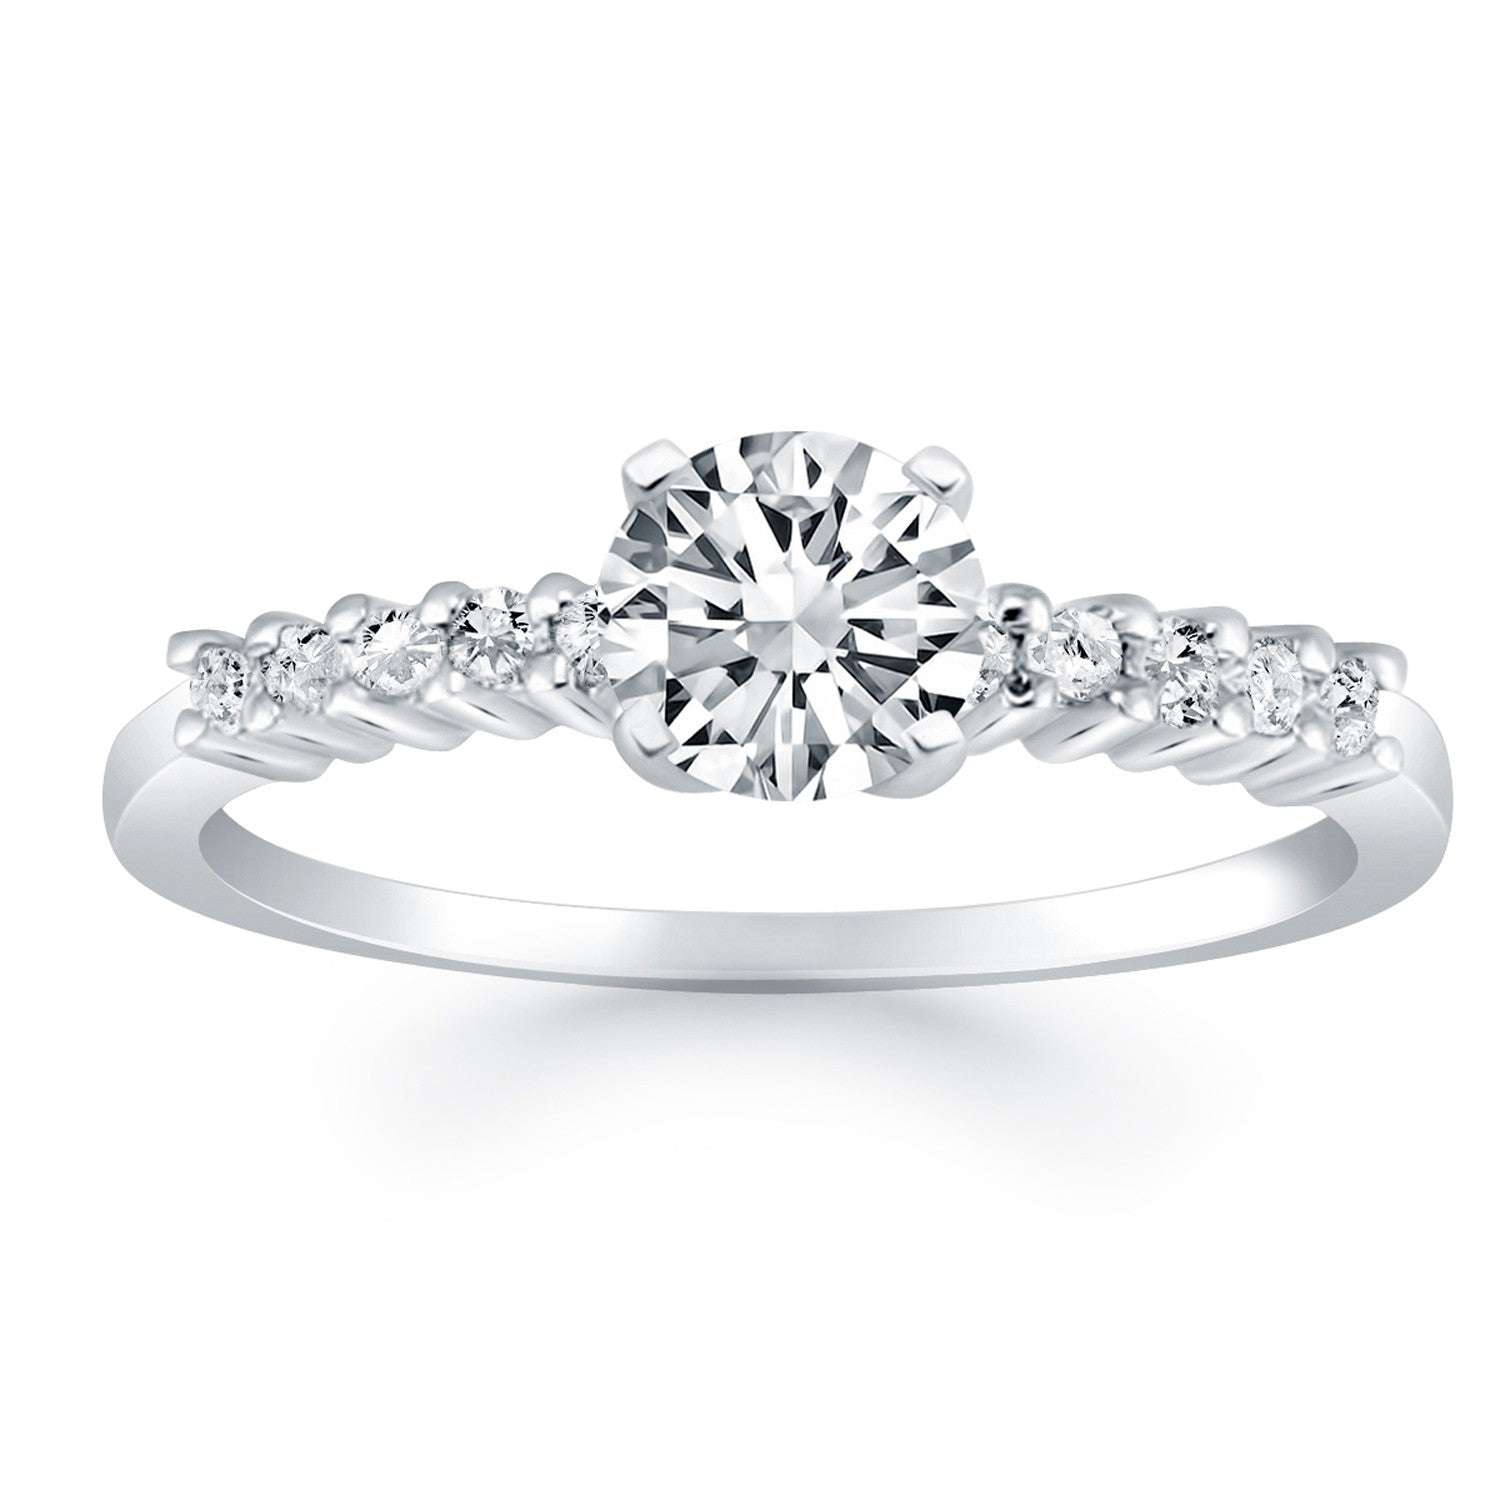 14k White Gold Shared Prong Accent Diamond Engagement Ring